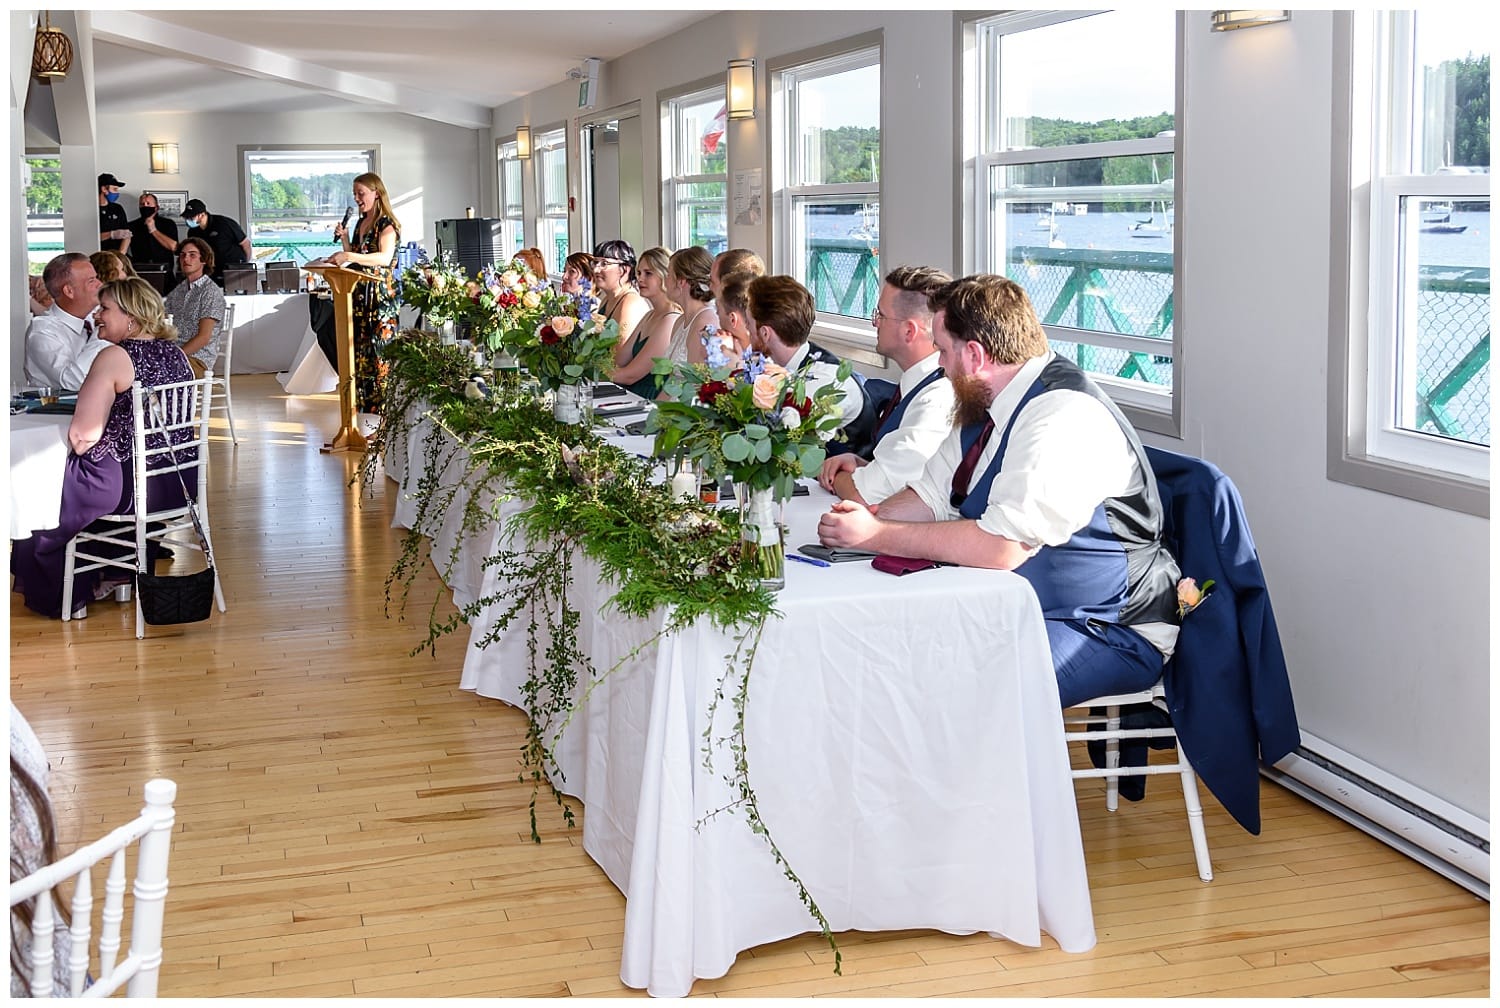 A MC announces the wedding party during a wedding reception at the St Mary's Boat Club in Halifax, NS.